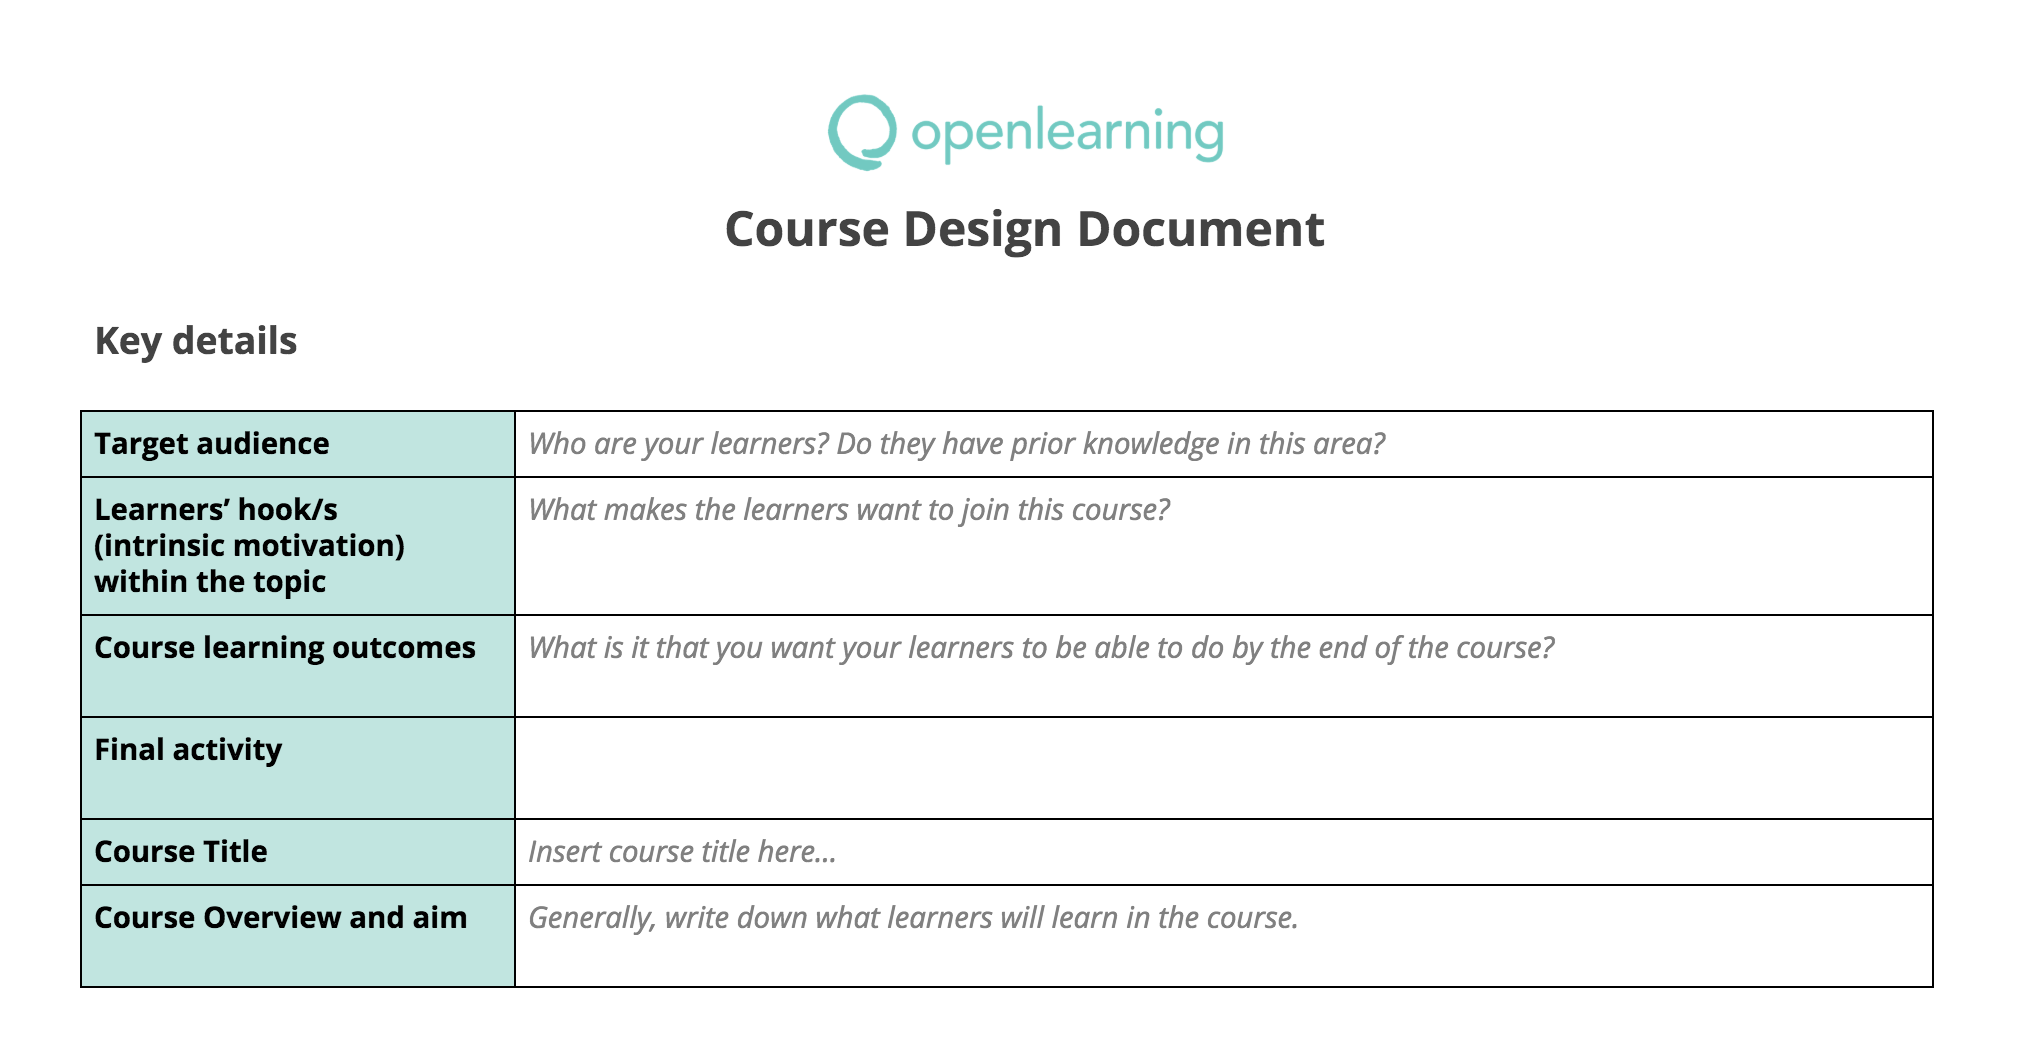 A Course Design Document - the key details listed are the target audience, learner's hook or motivation, learning outcomes, final activity, course title and course overview.